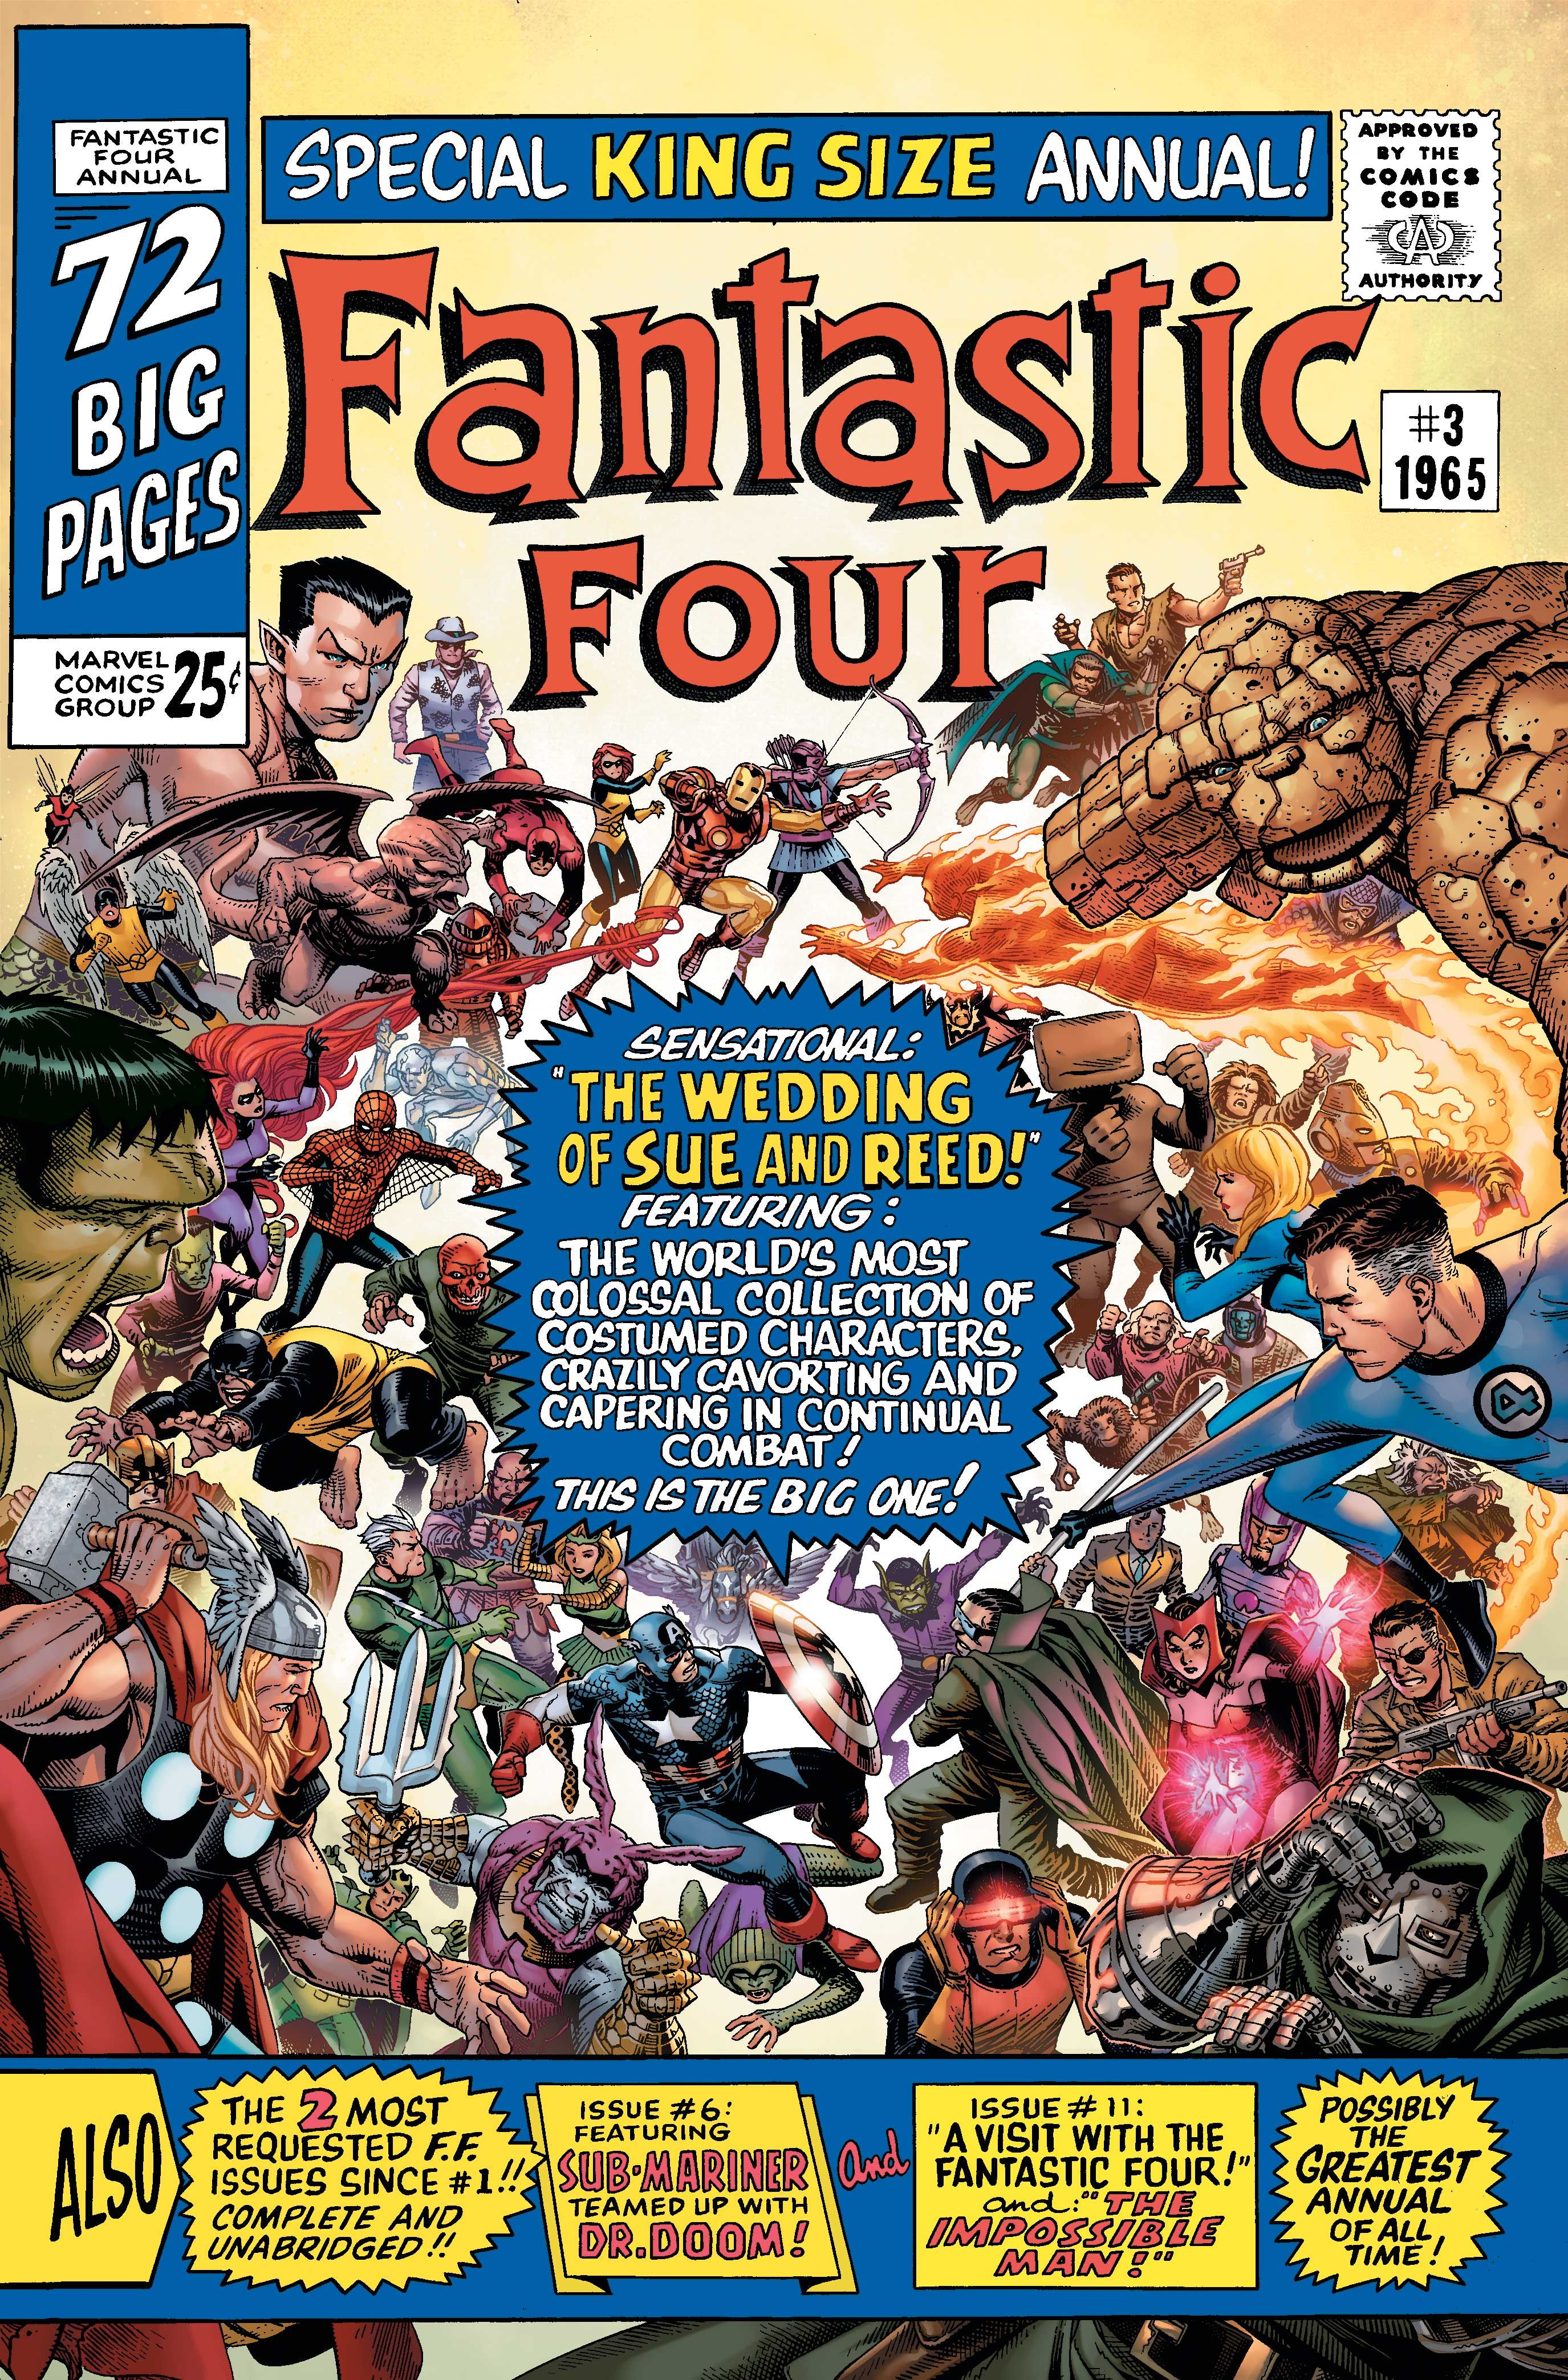 Fantastic Four 60th Anniversary cover -- Jim Cheung variant cover